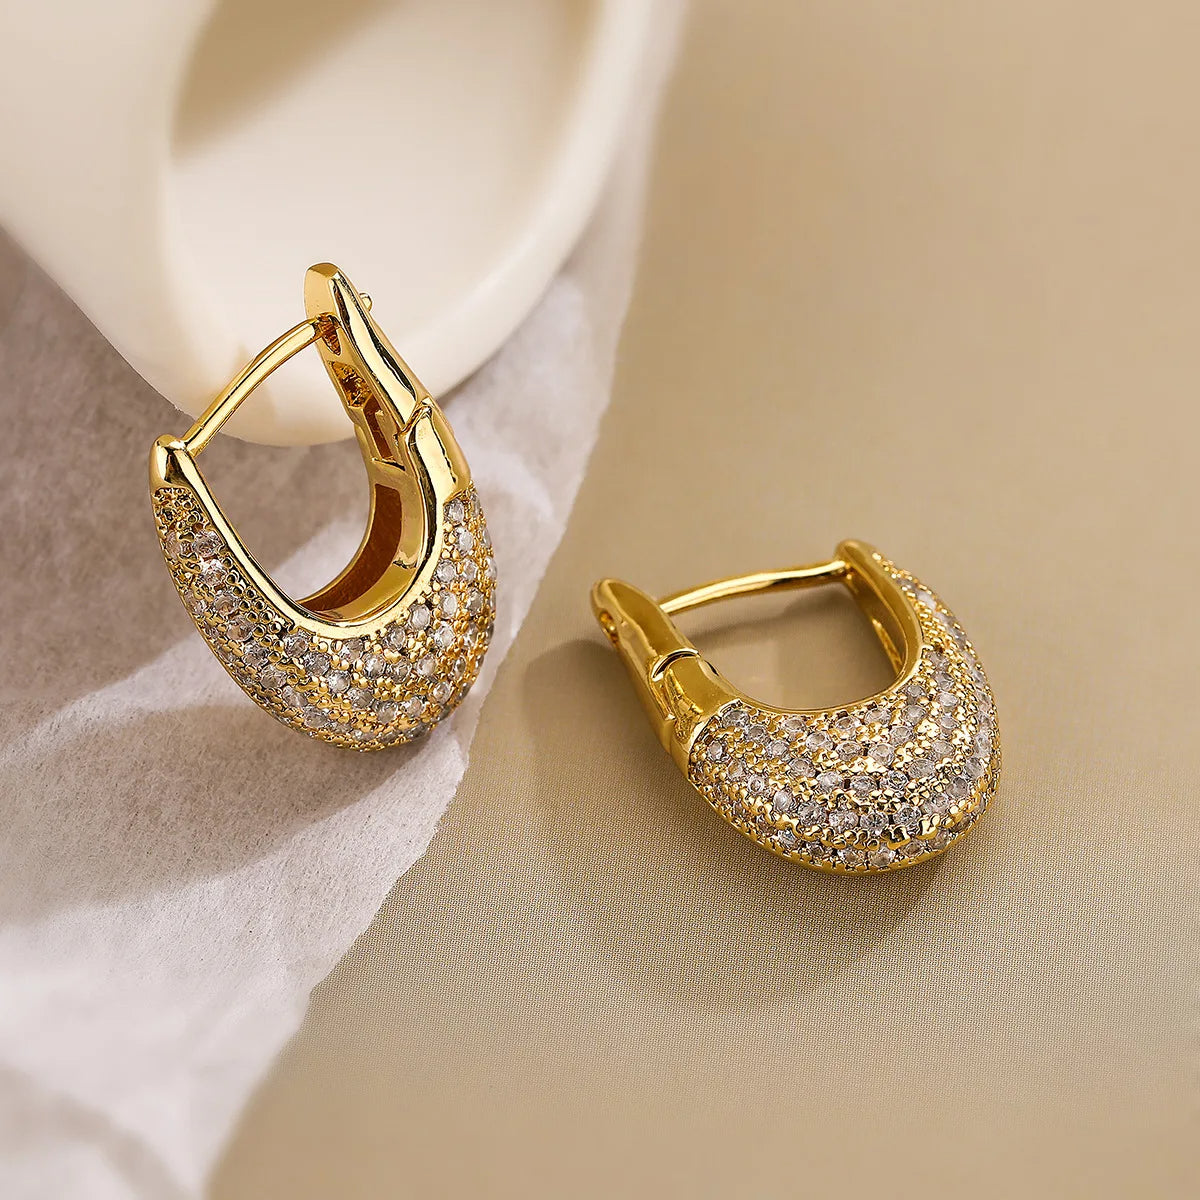 A pair of antique earrings